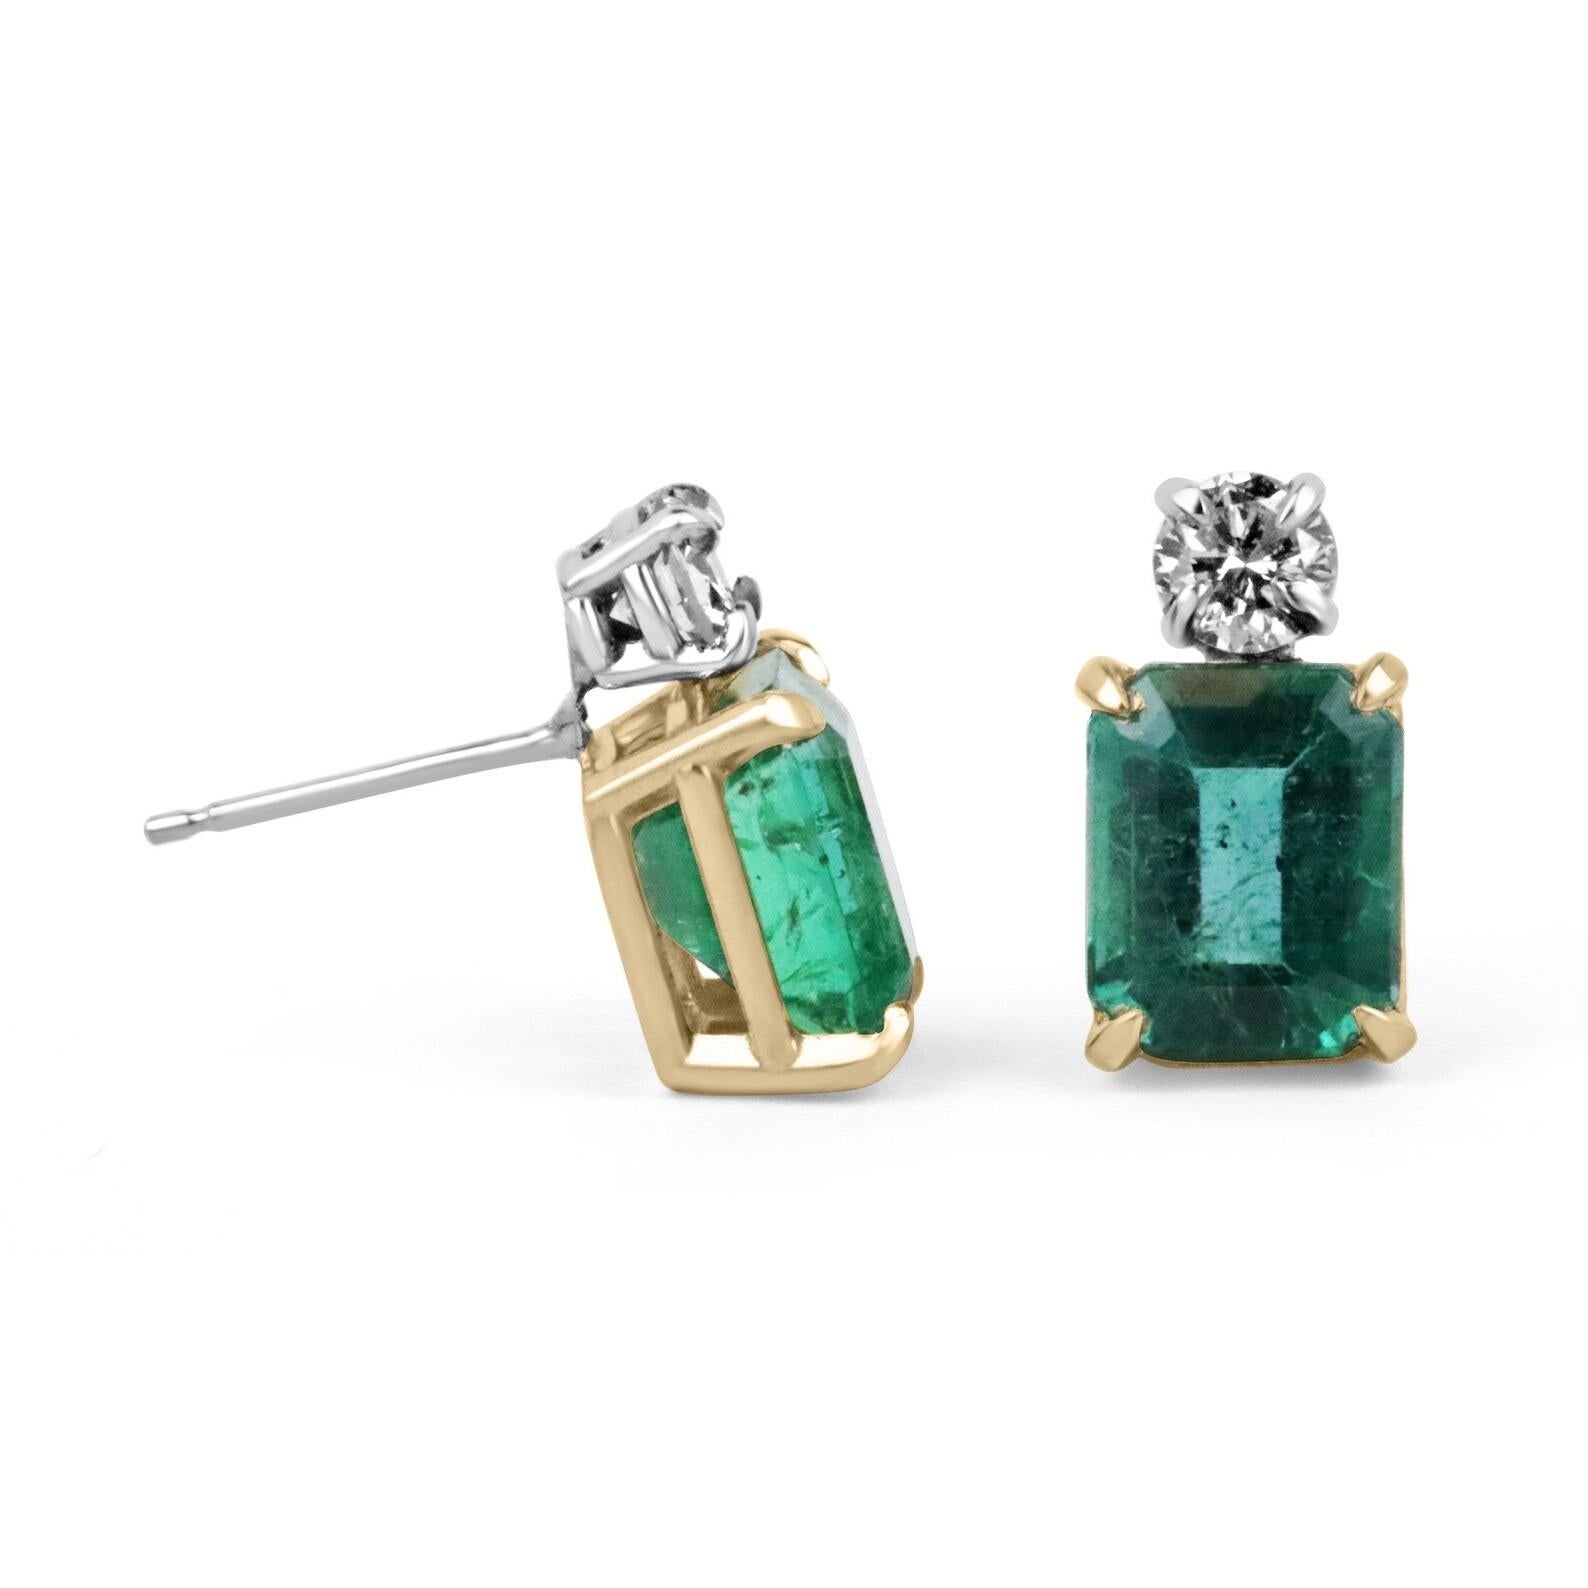 Elegance defined! The perfect gift for someone celebrating a birthday or anniversary, these 7.20tcw vivid sea deep green emerald cut and diamond earrings are fashioned in solid 18k yellow and white gold. They feature genuine rare deeply saturated